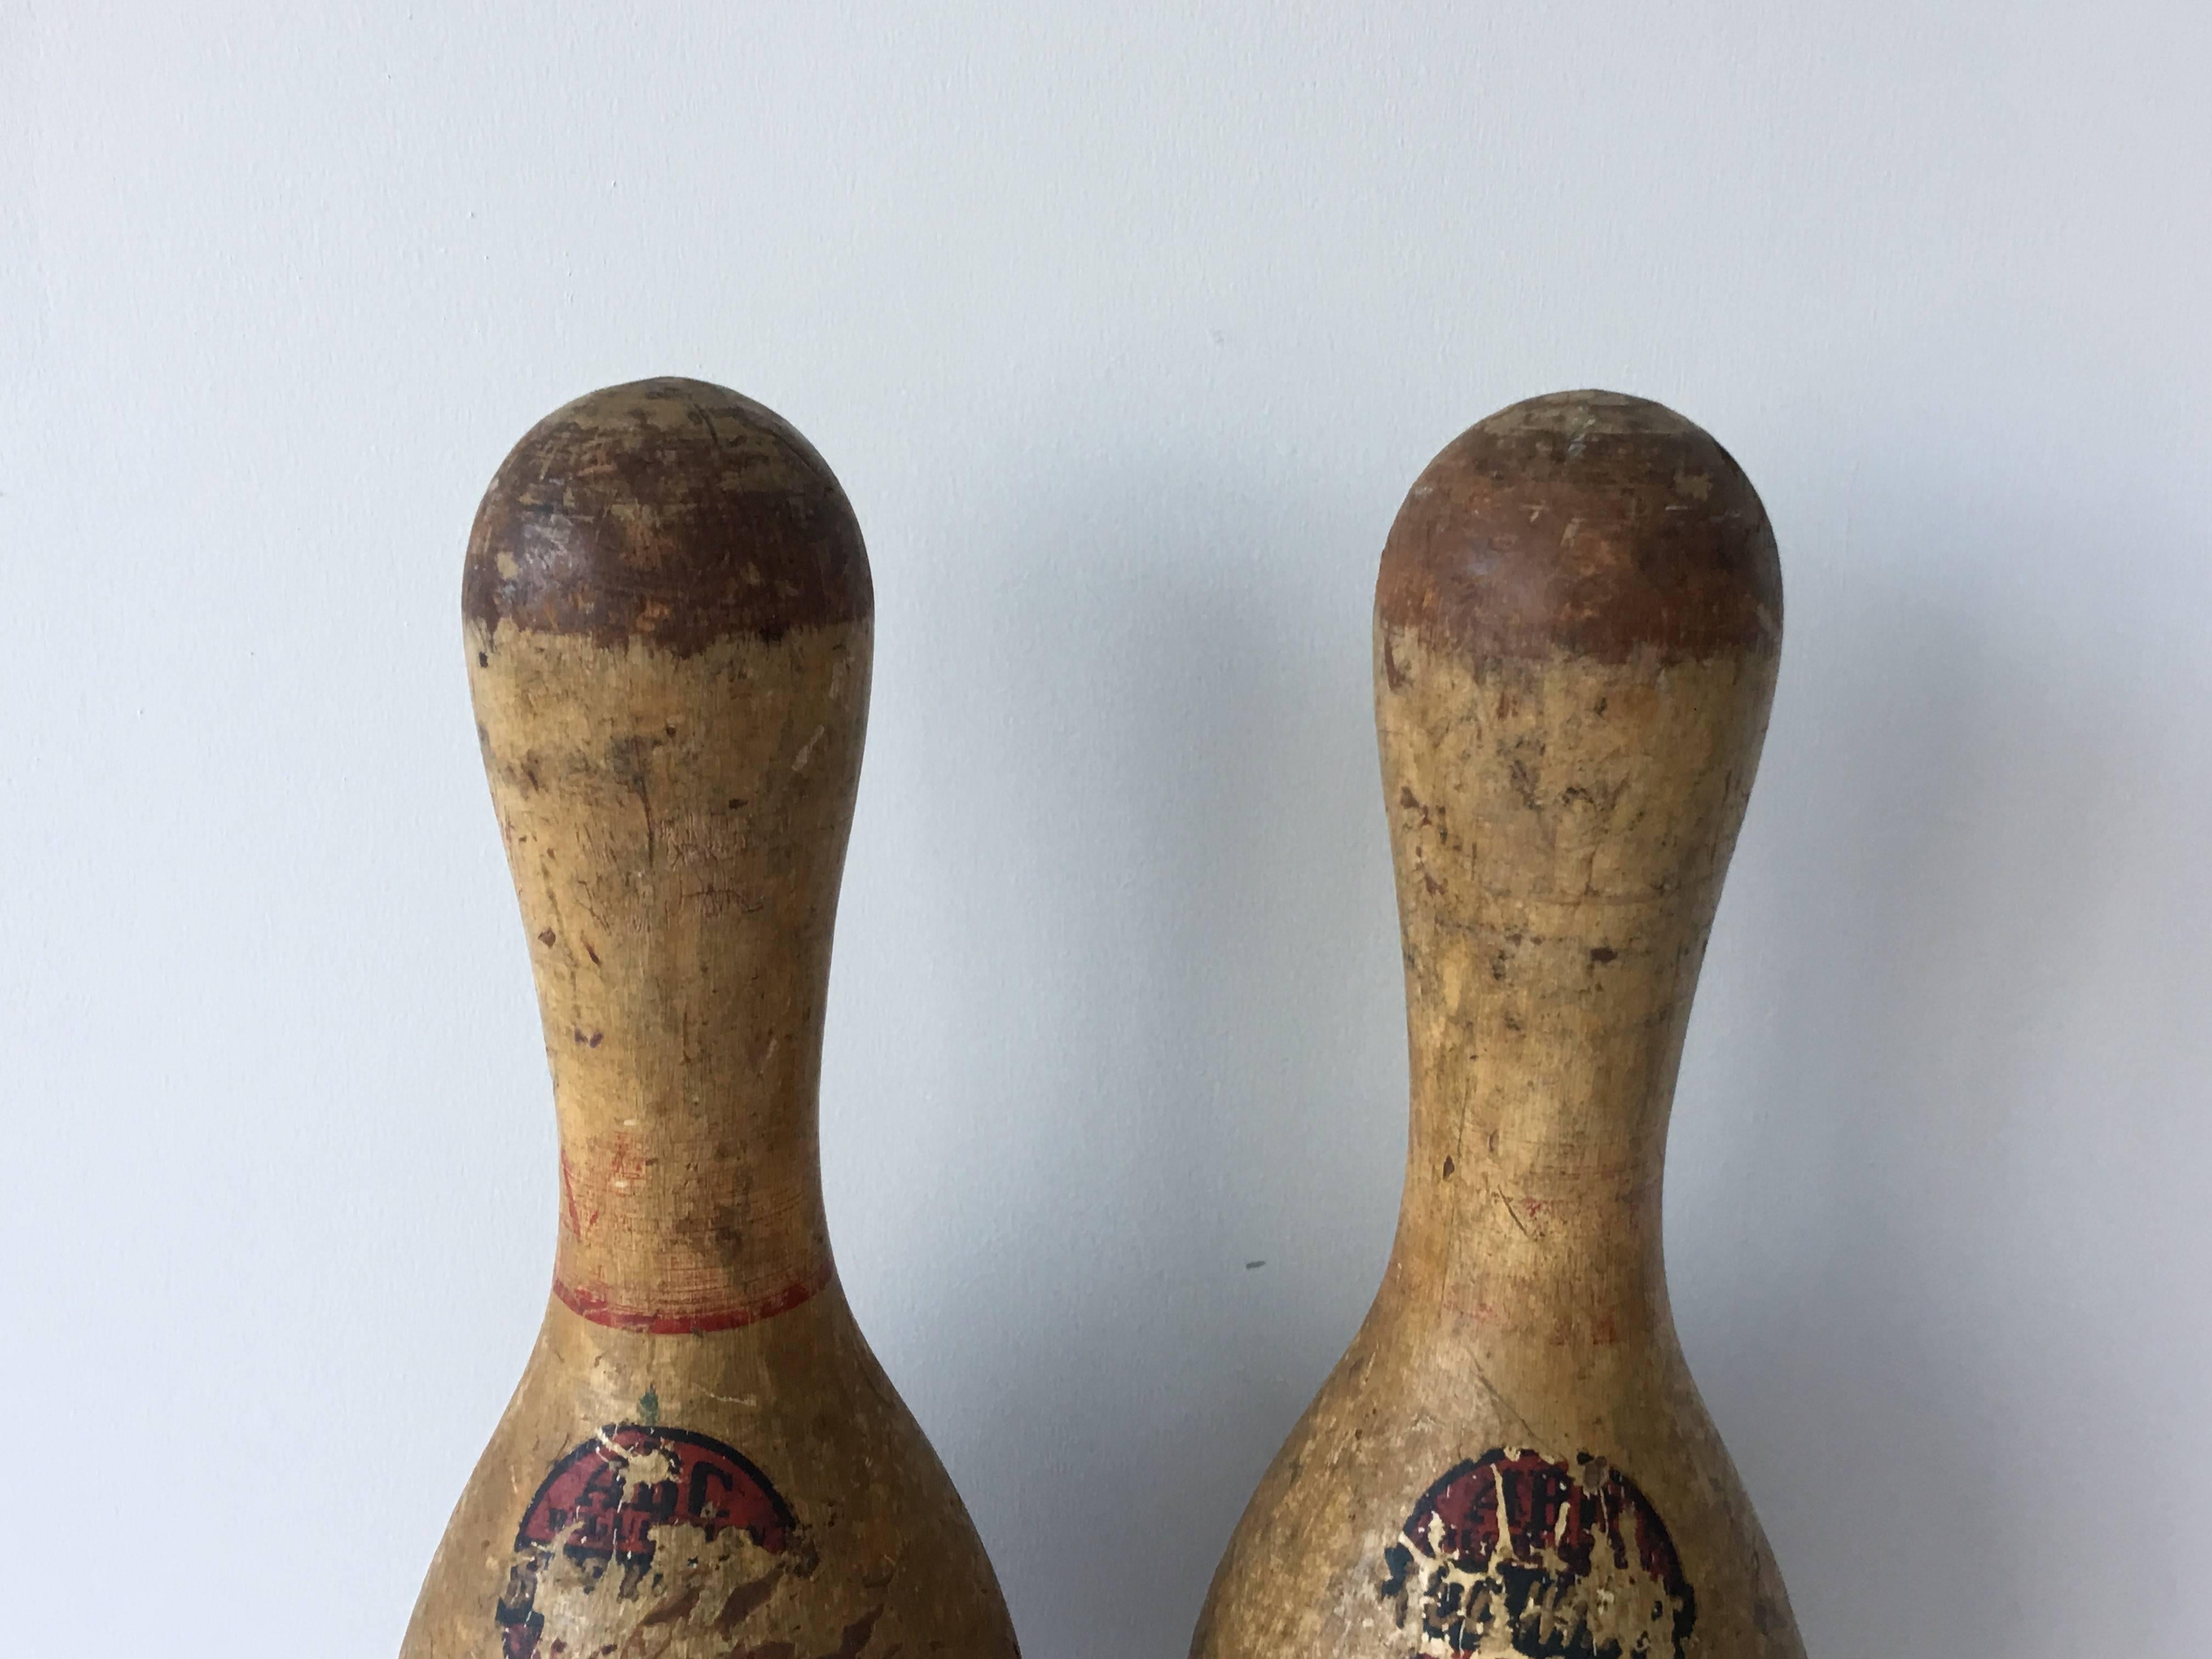 Antique pair of wooden bowling pins. Rustic and Primitive touch. Old logo stickers on each, worn with age.